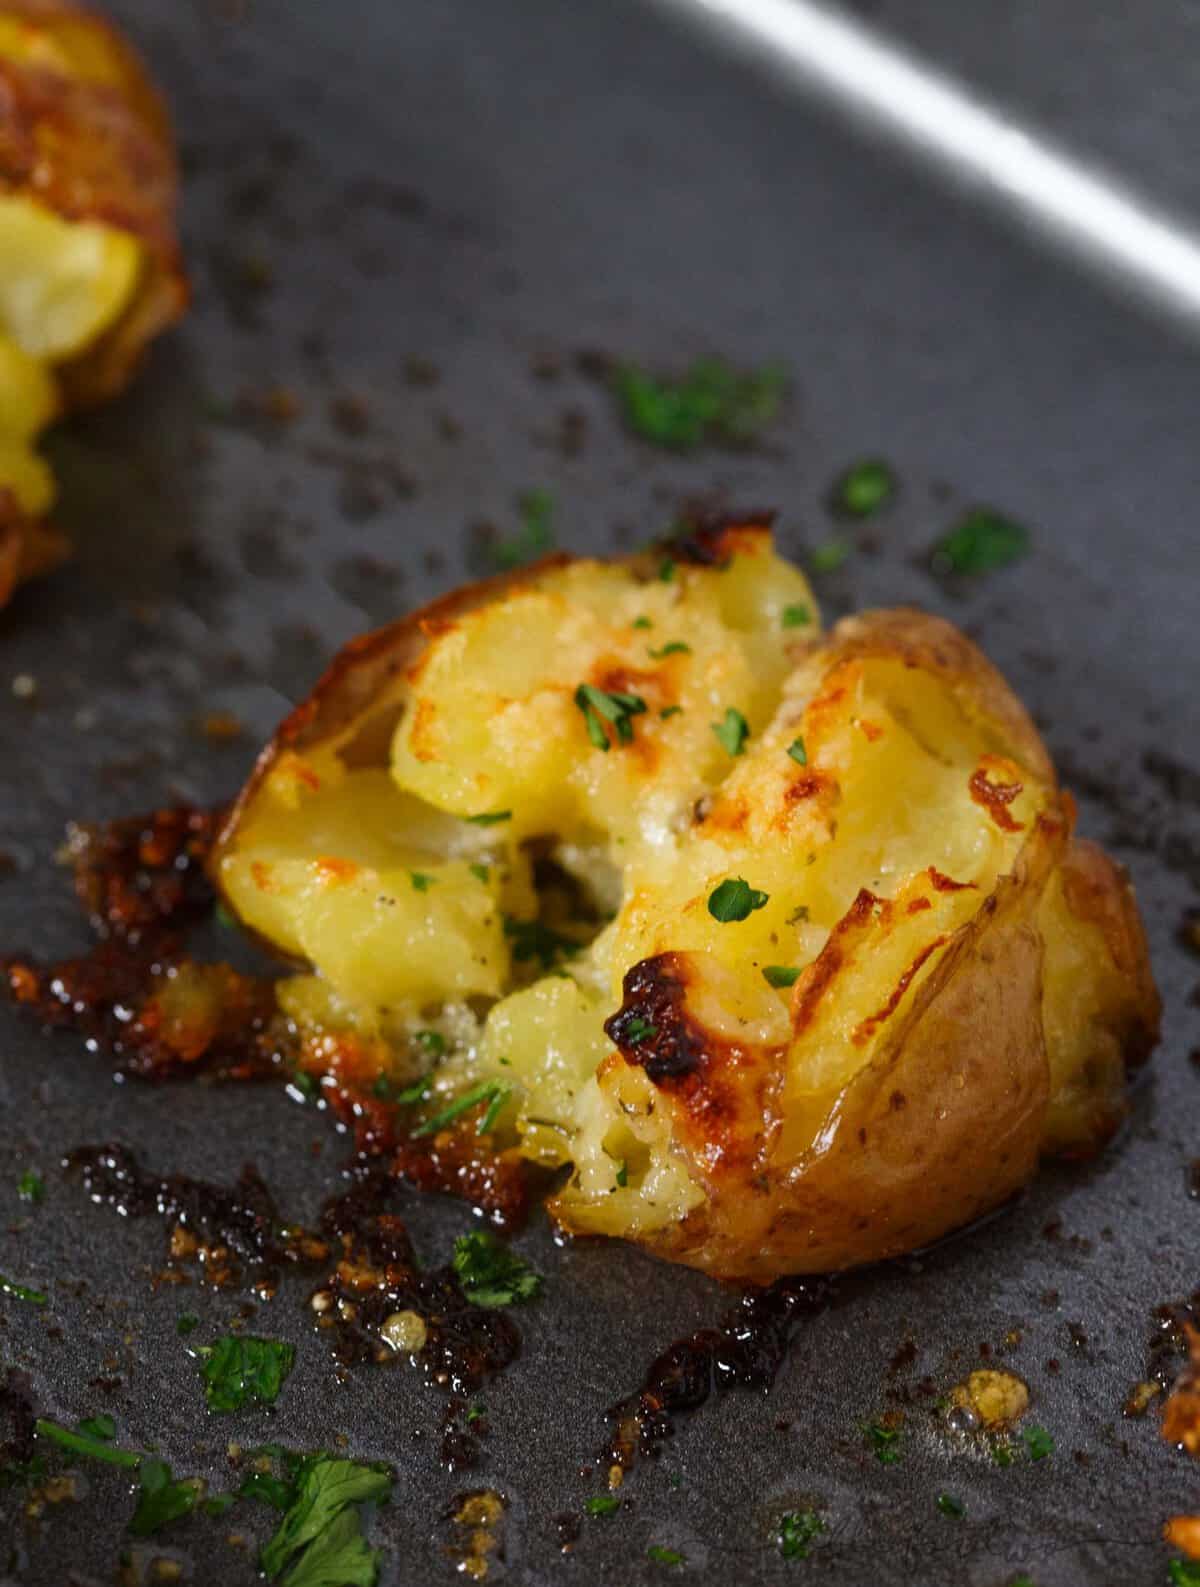 Smashed potatoes are a great alternative to mashed potatoes! These smashed potatoes are topped with a garlic ranch butter then parmesan cheese is sprinkled on top! SO GOOD!!